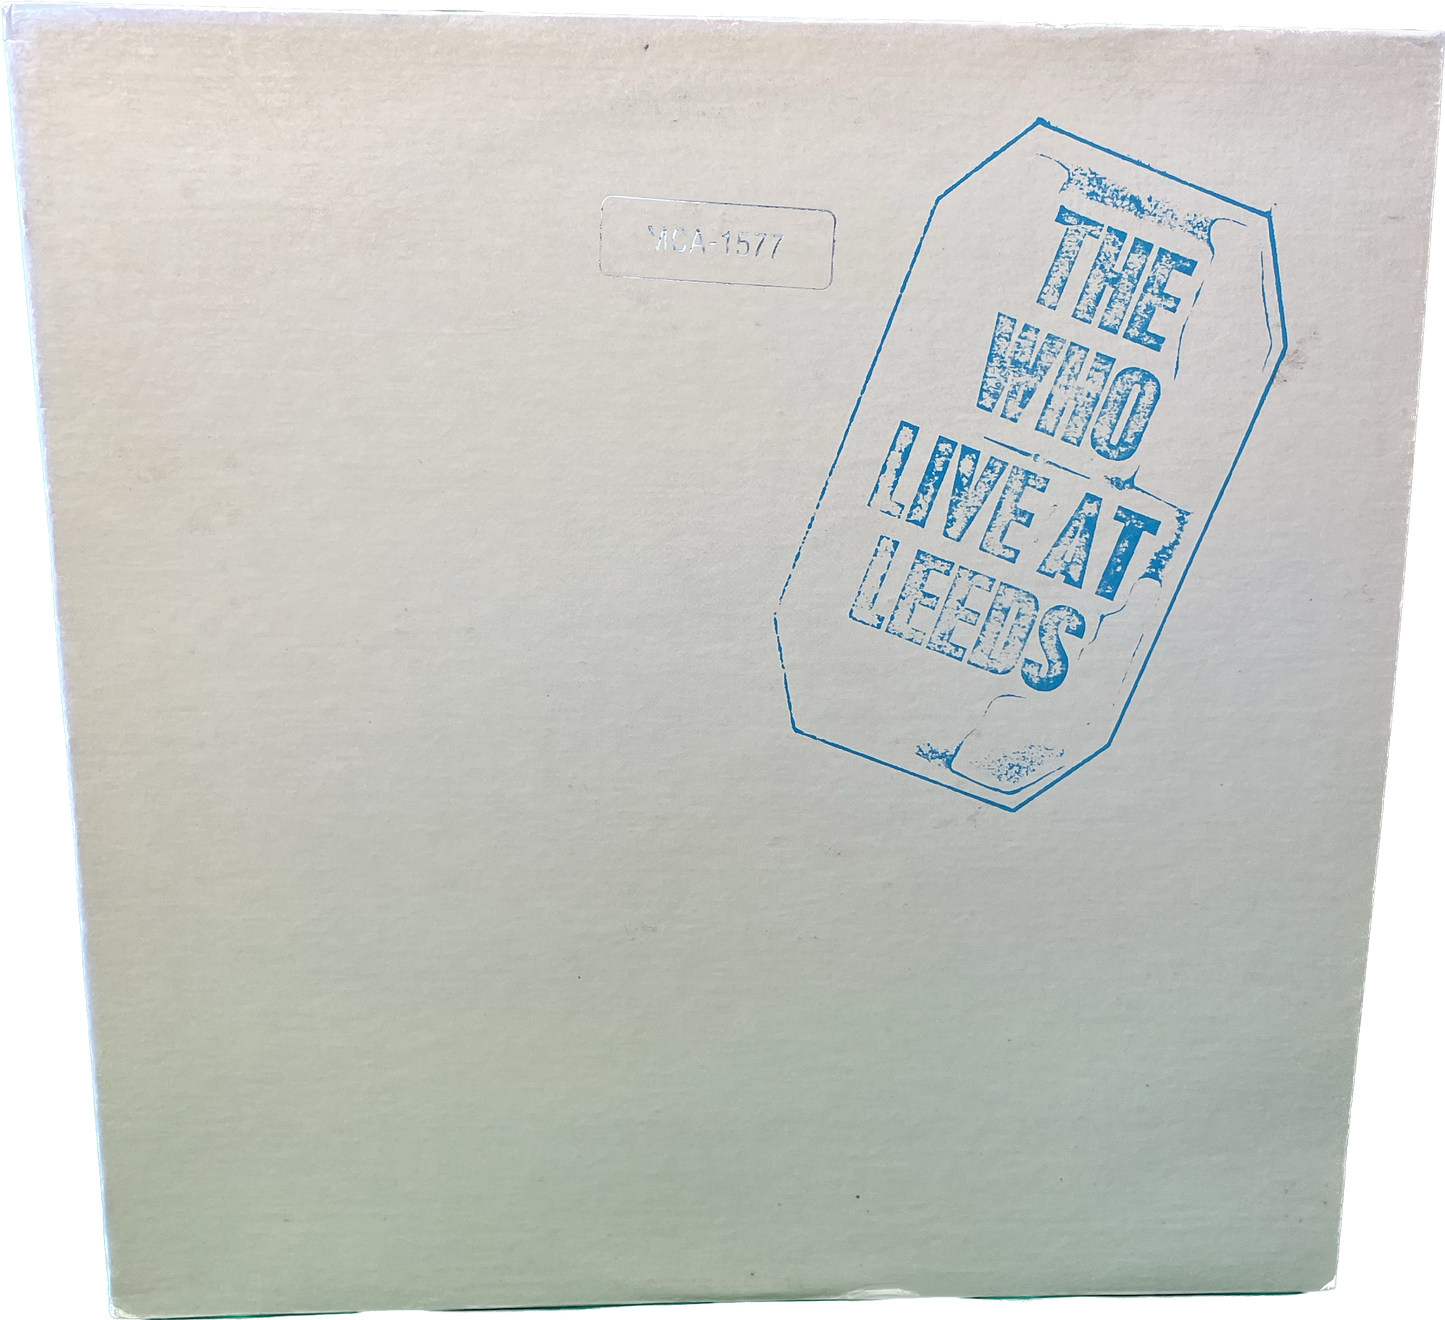 VG VG The Who 'Live At Leeds' 1970 1st press Complete w Inserts